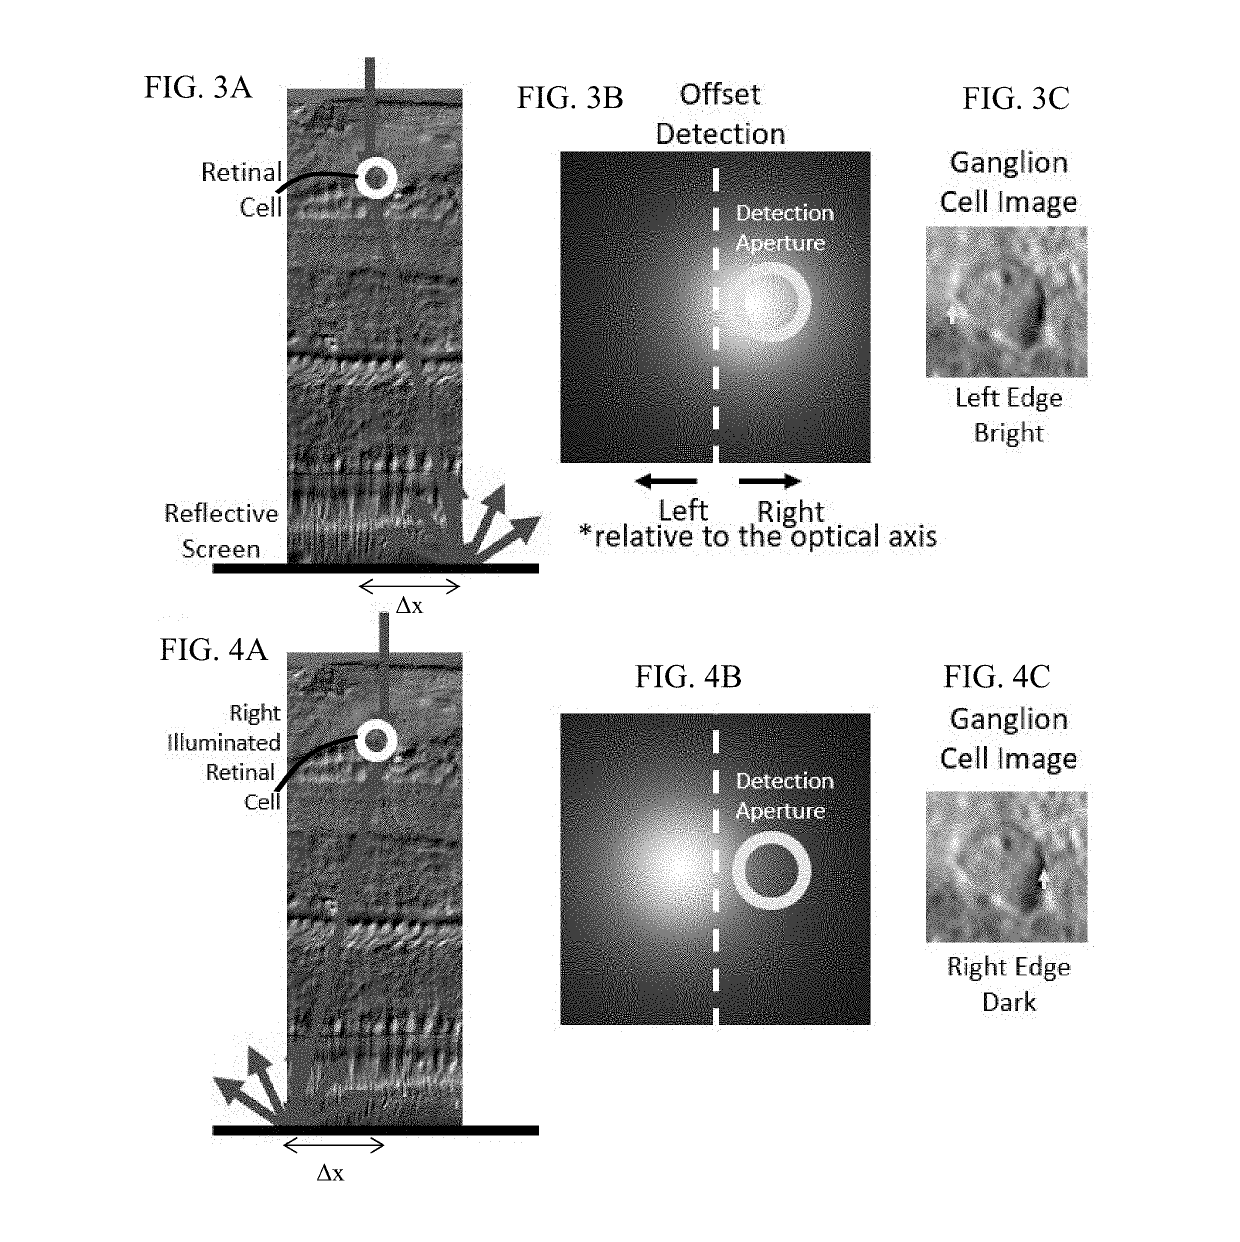 Label-free contrast enhancement for translucent cell imaging by purposefully displacing the detector